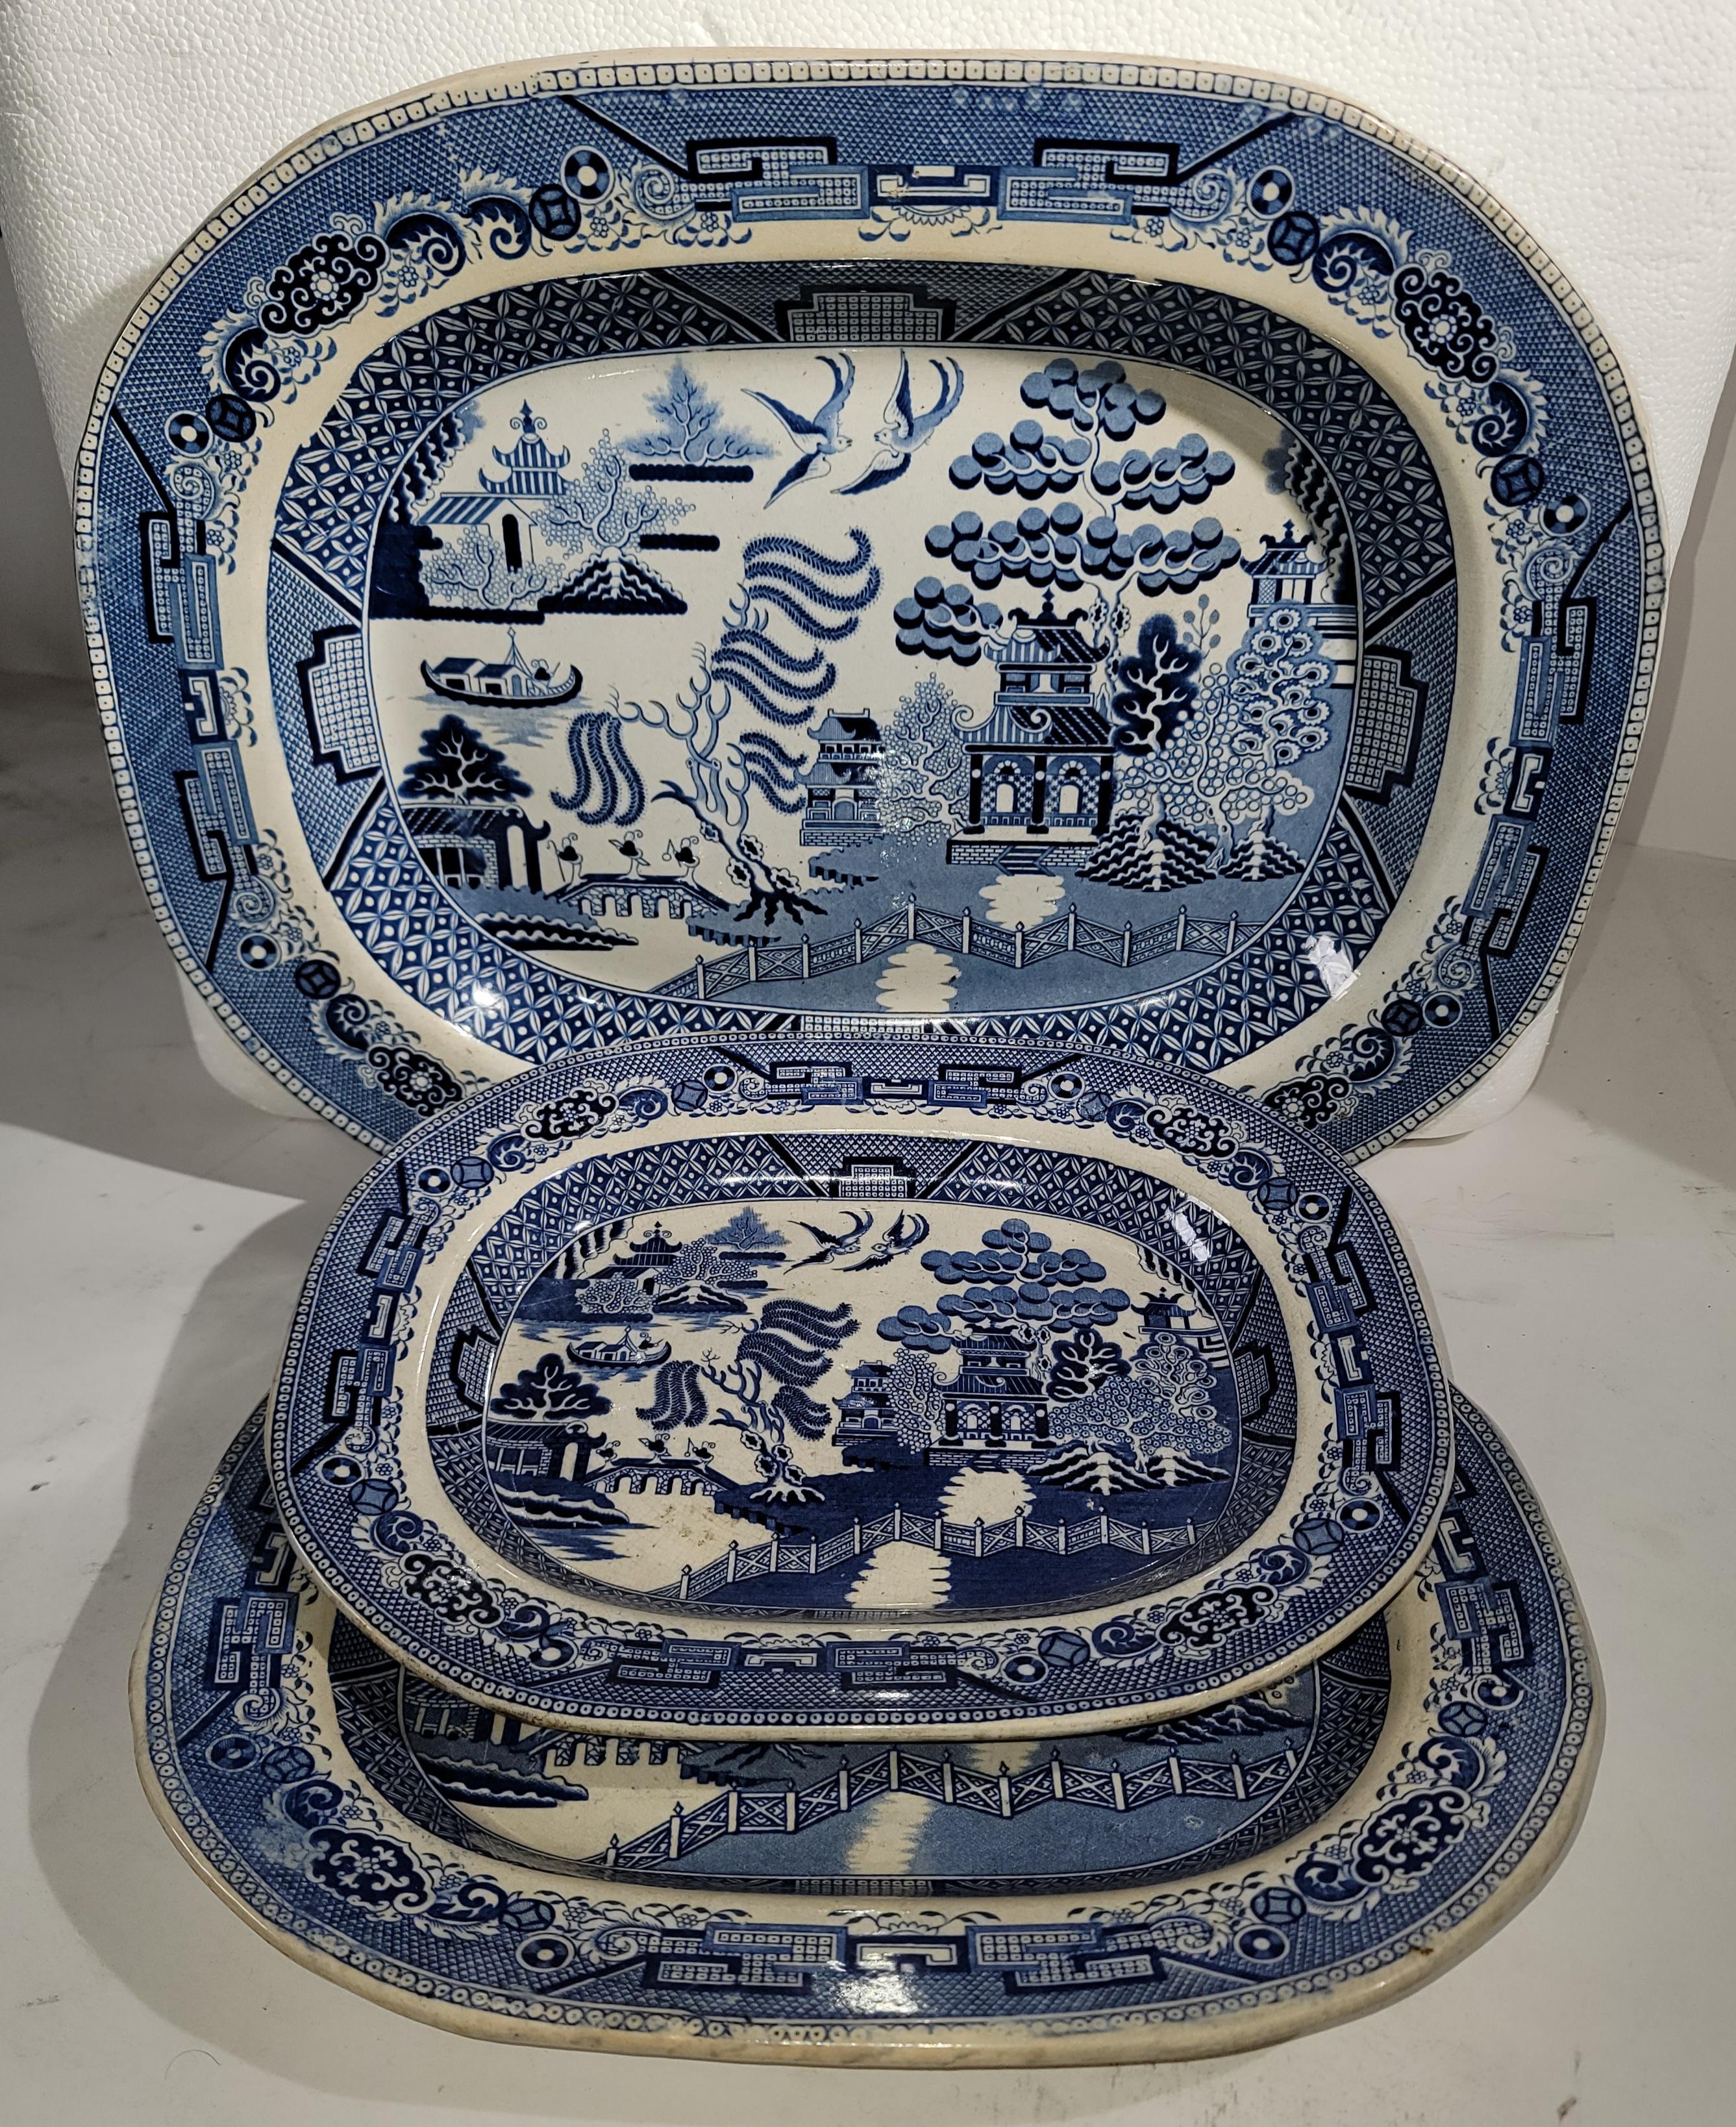 These early 19th Century English Blue willow platters are all in very good condition and stamped England with manufacture stamps. All in pristine condition with no chips or cracks.

Largest Platter measures - 14 x 17 
medium platter measures -11